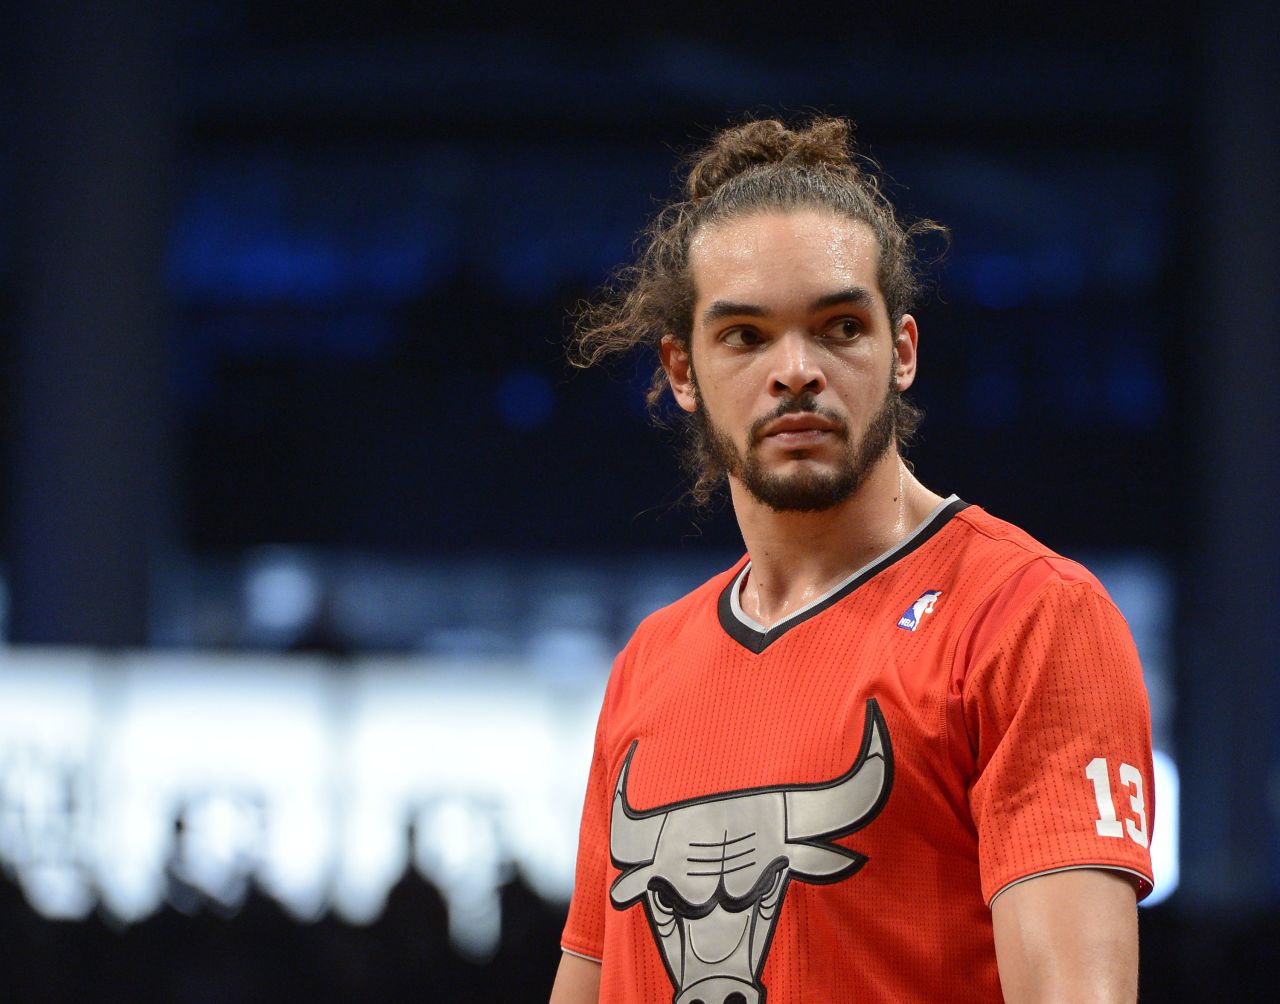 Joakim Noah is a dual U.S. and French citizen, and has represented France in international competition. The Chicago Bulls center checked on his father, former tennis pro Yannick Noah, after the Paris attacks in November. 